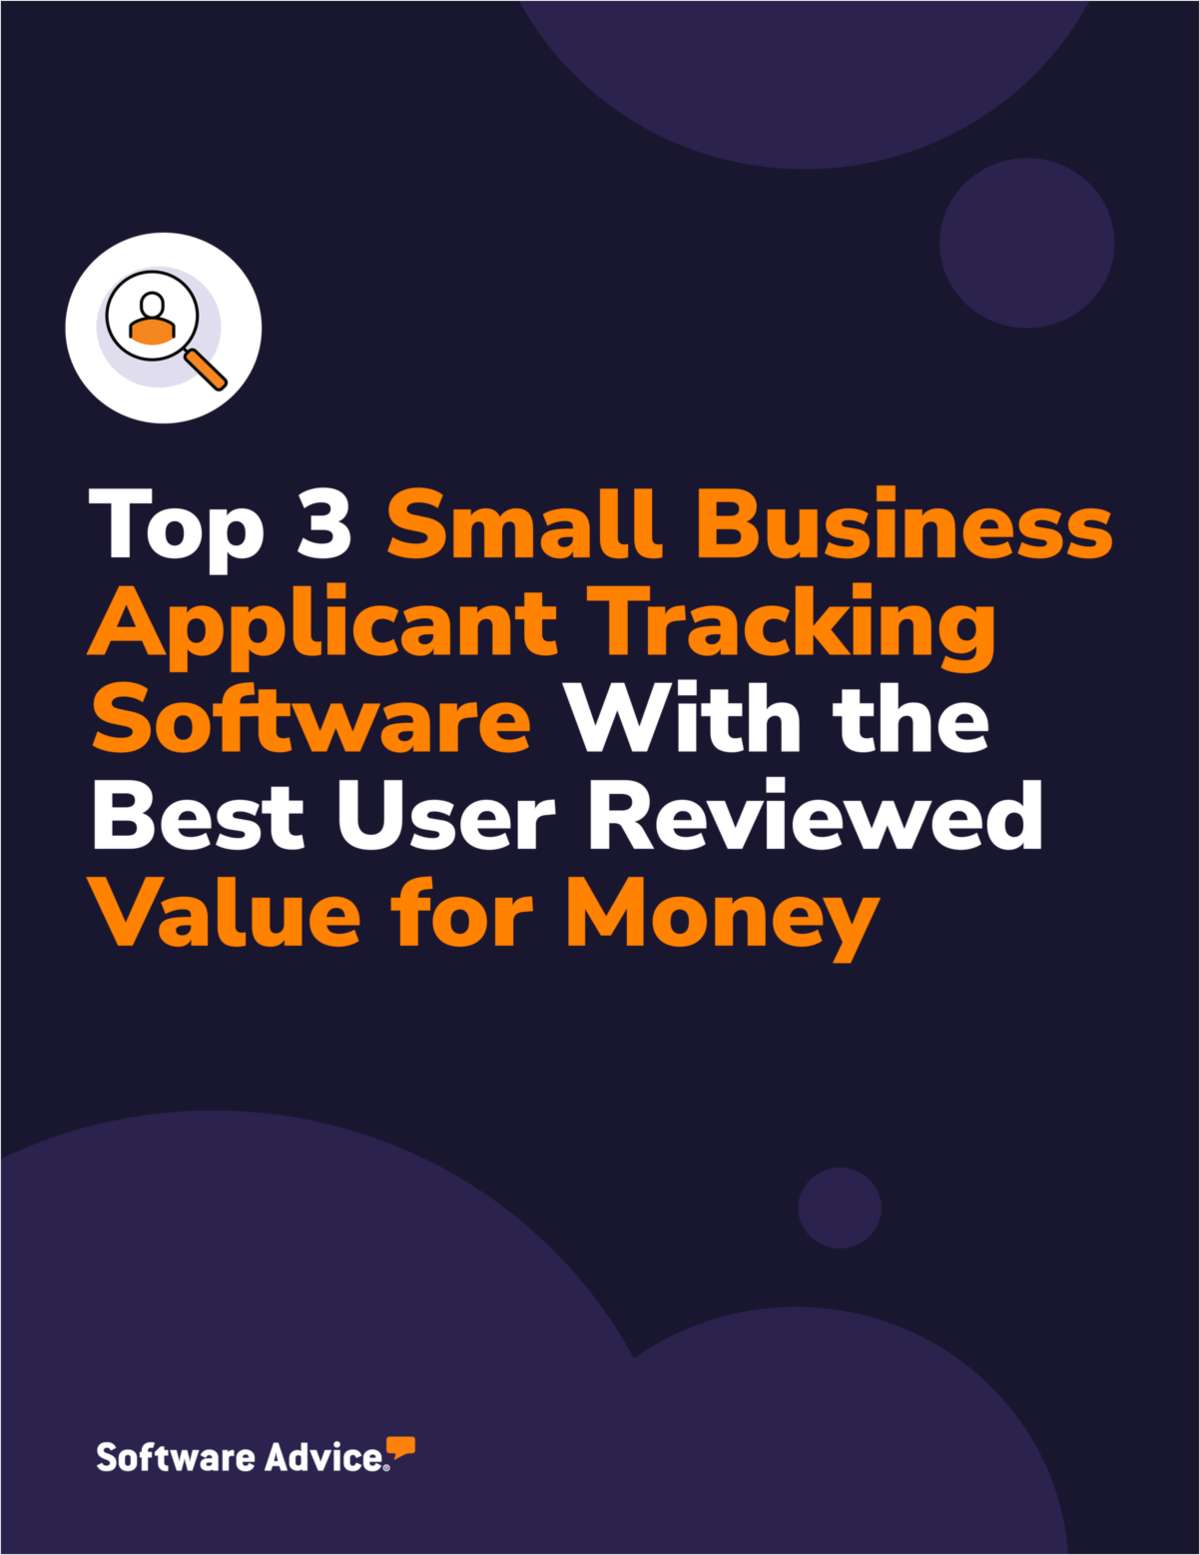 Top 3 Small Business Applicant Tracking Software With the Best User Reviewed Value for Money